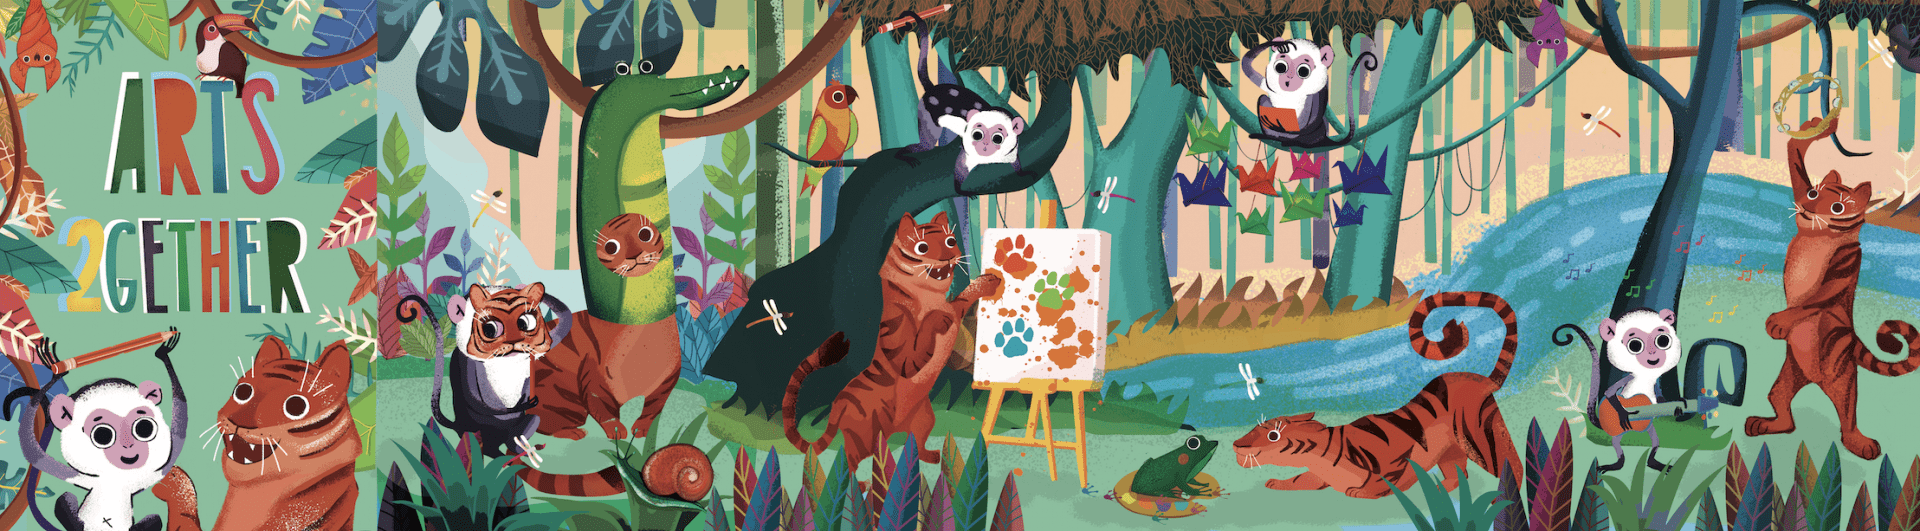 Illustration of a variety of animal creating art, music and crafts in a jungle with the title Arts2gether.